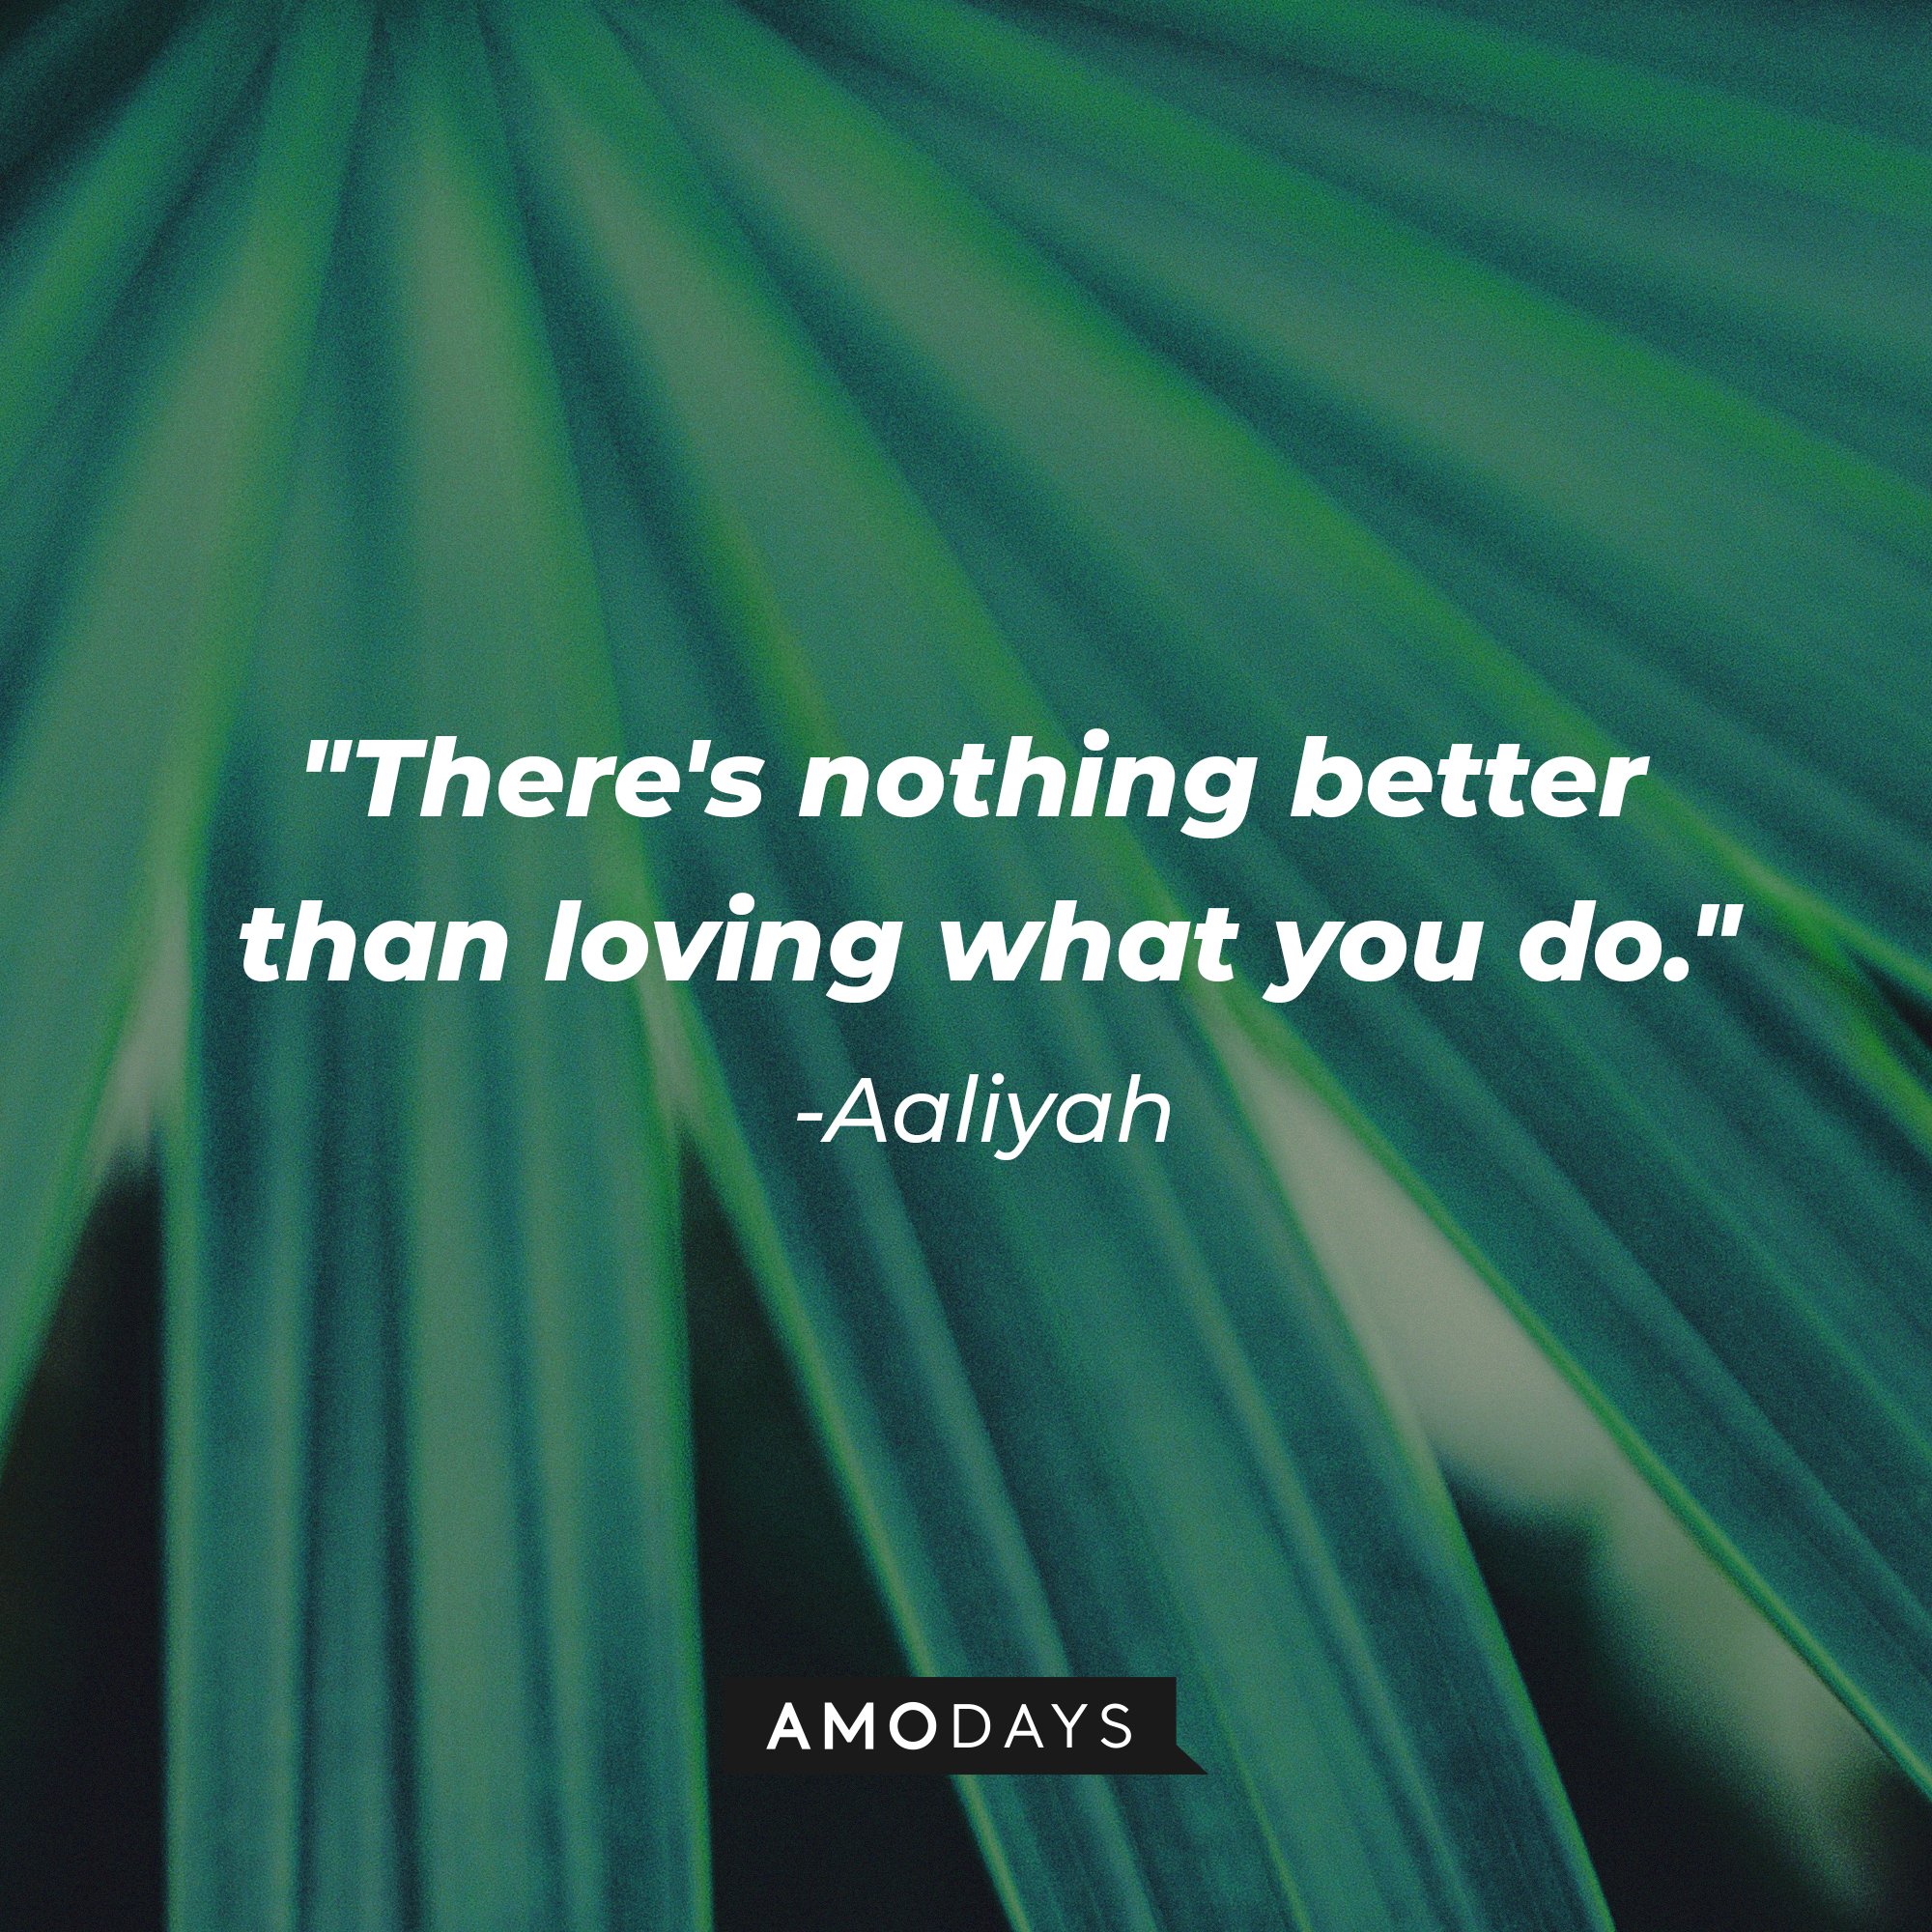 Aaliyah’s quote: "There's nothing better than loving what you do."  | Image: AmoDays